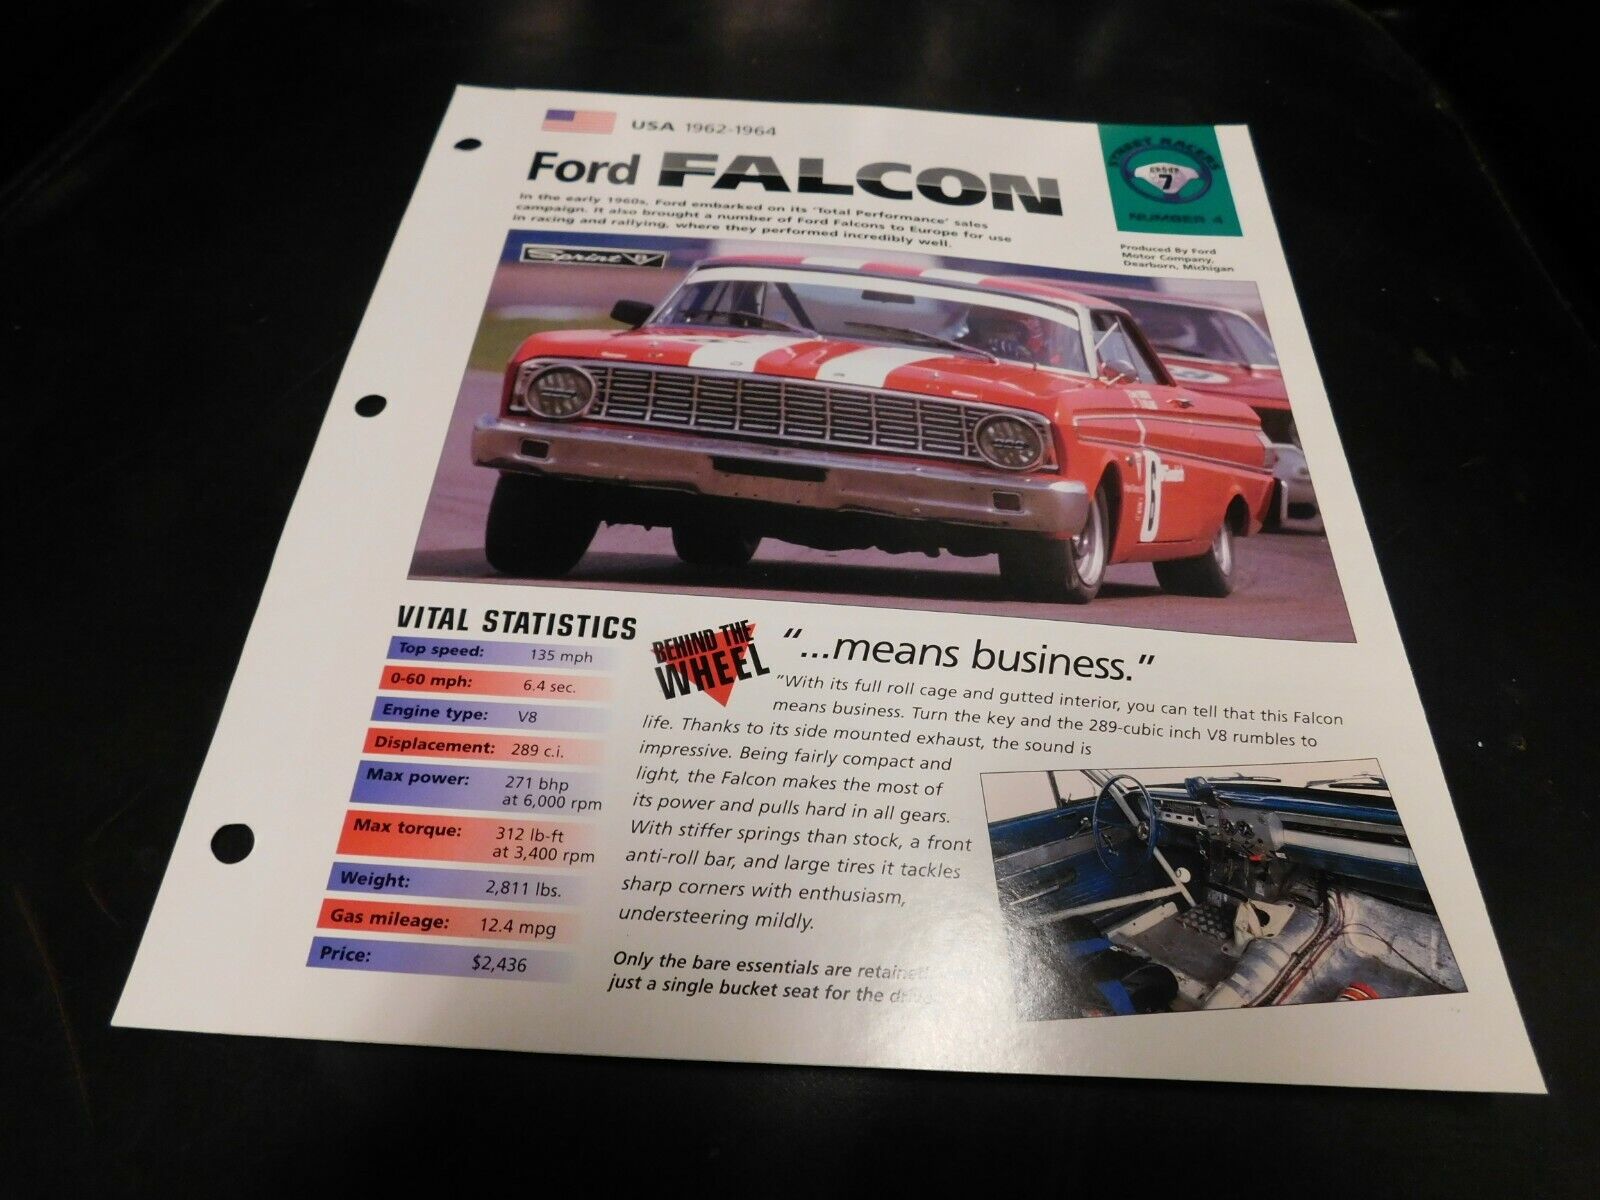 1962-1964 Ford Falcon Spec Sheet Brochure Photo Poster 1963